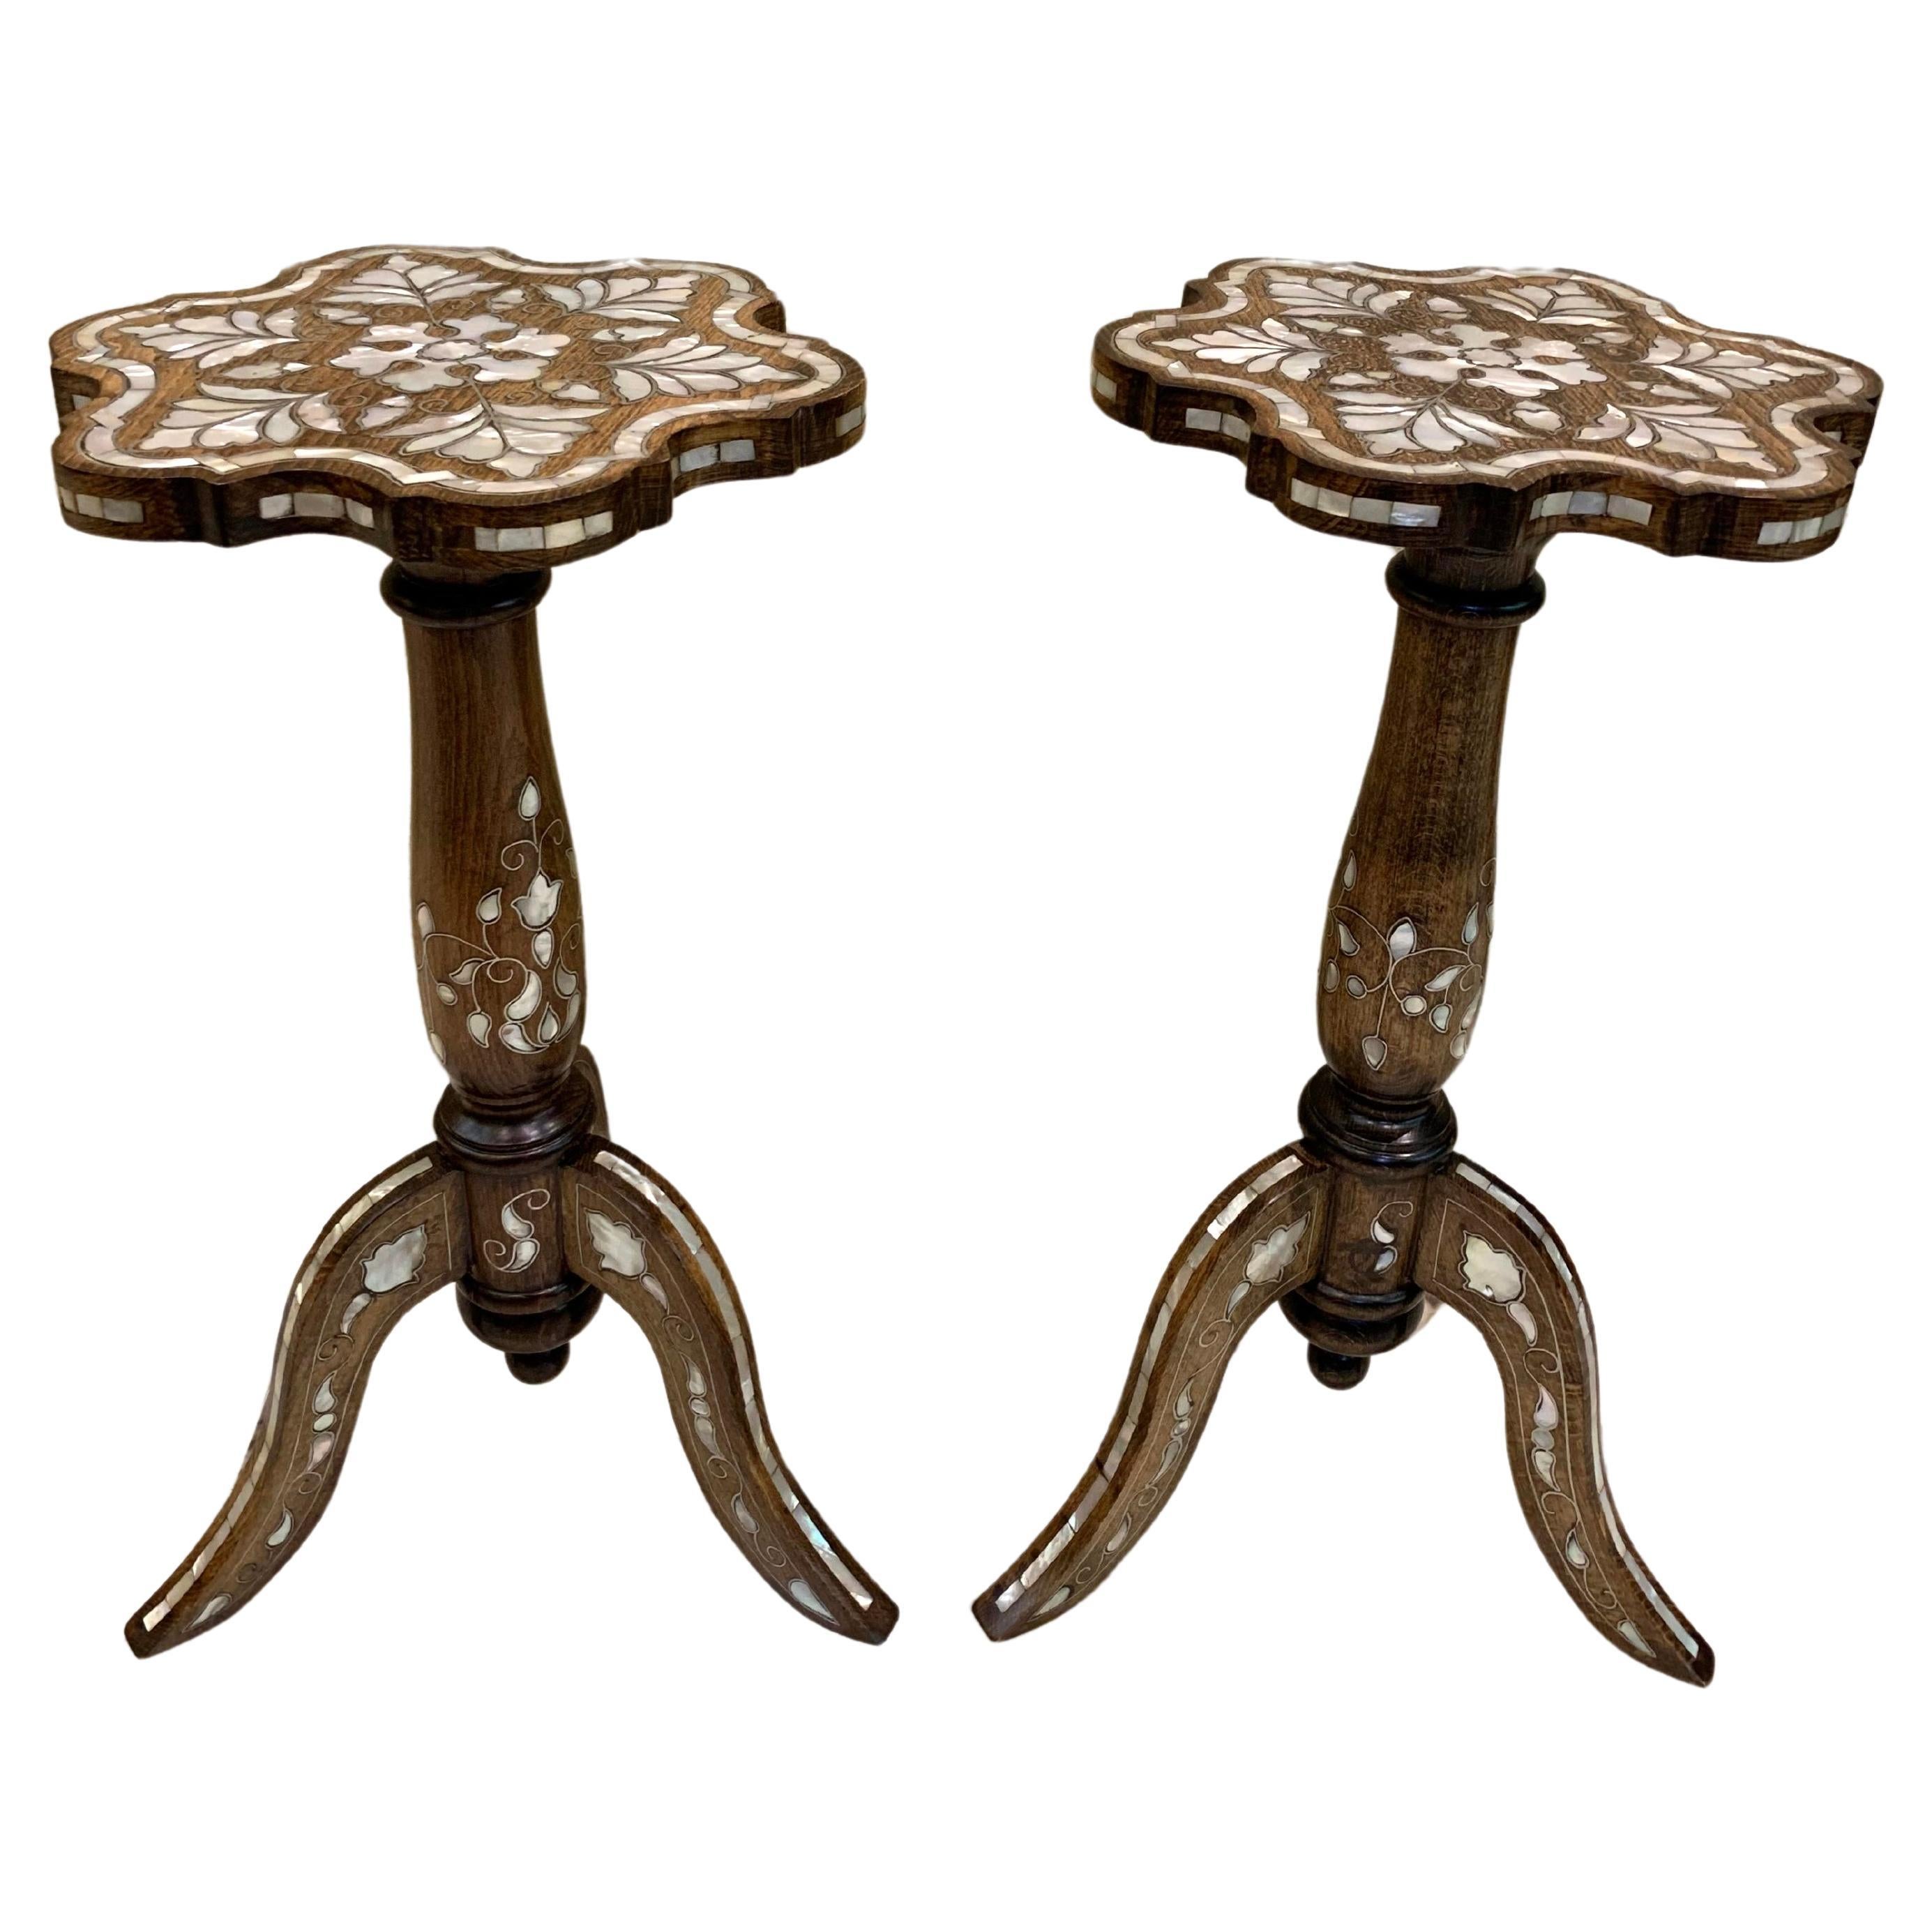 Handcrafted Pair of Wooden Coffee Tables with Mother-of-Pearl Inlaid Legs